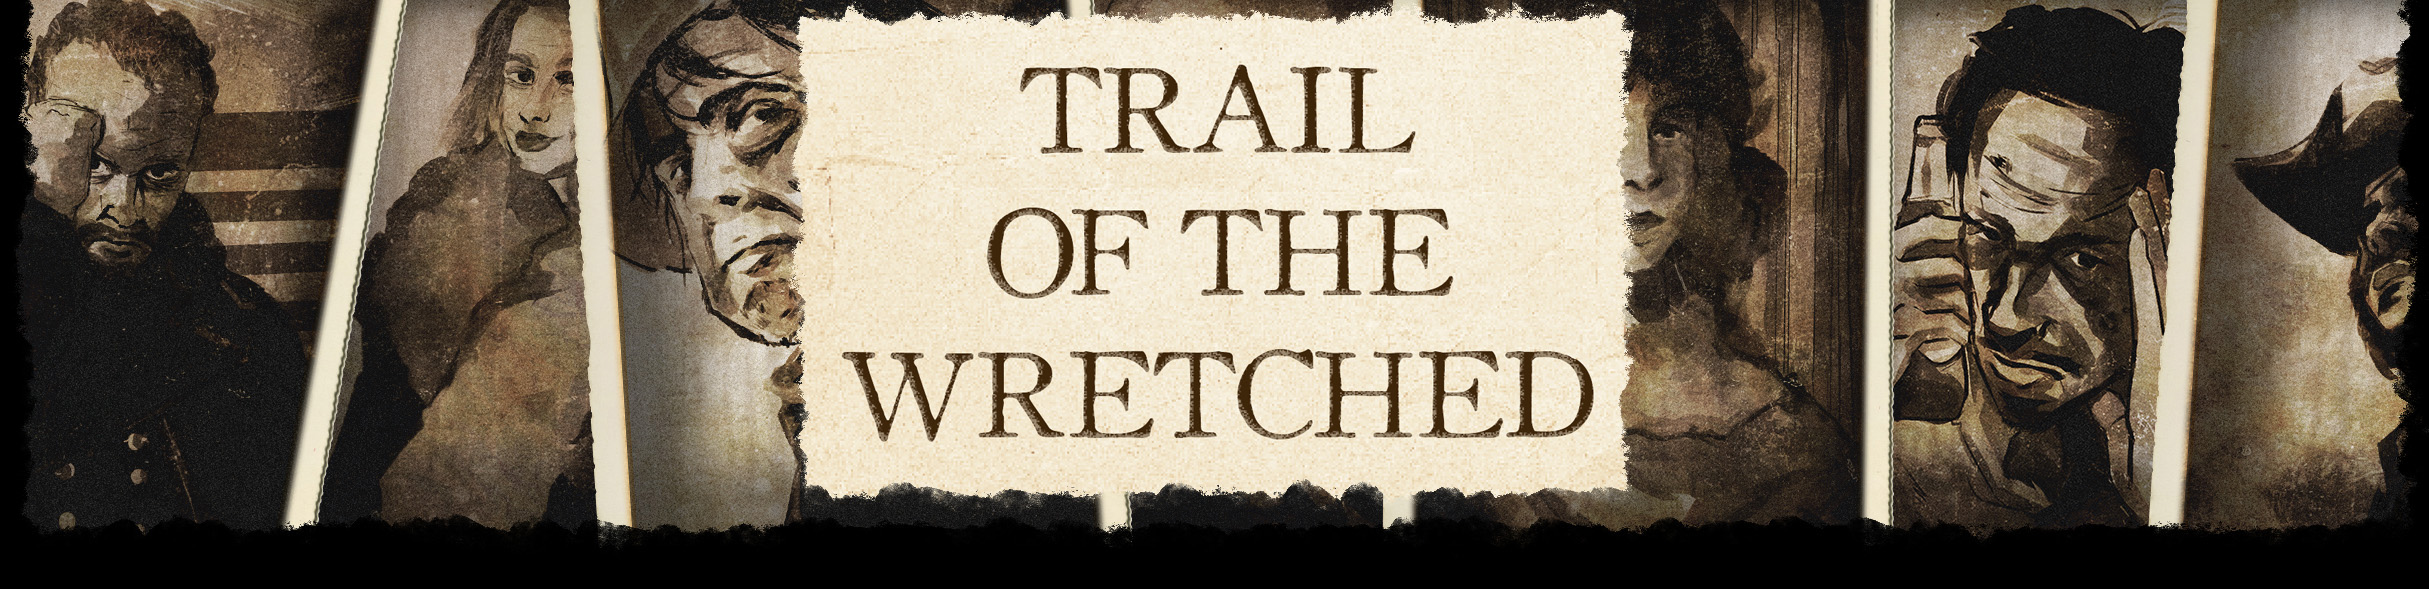 Trail of the Wretched